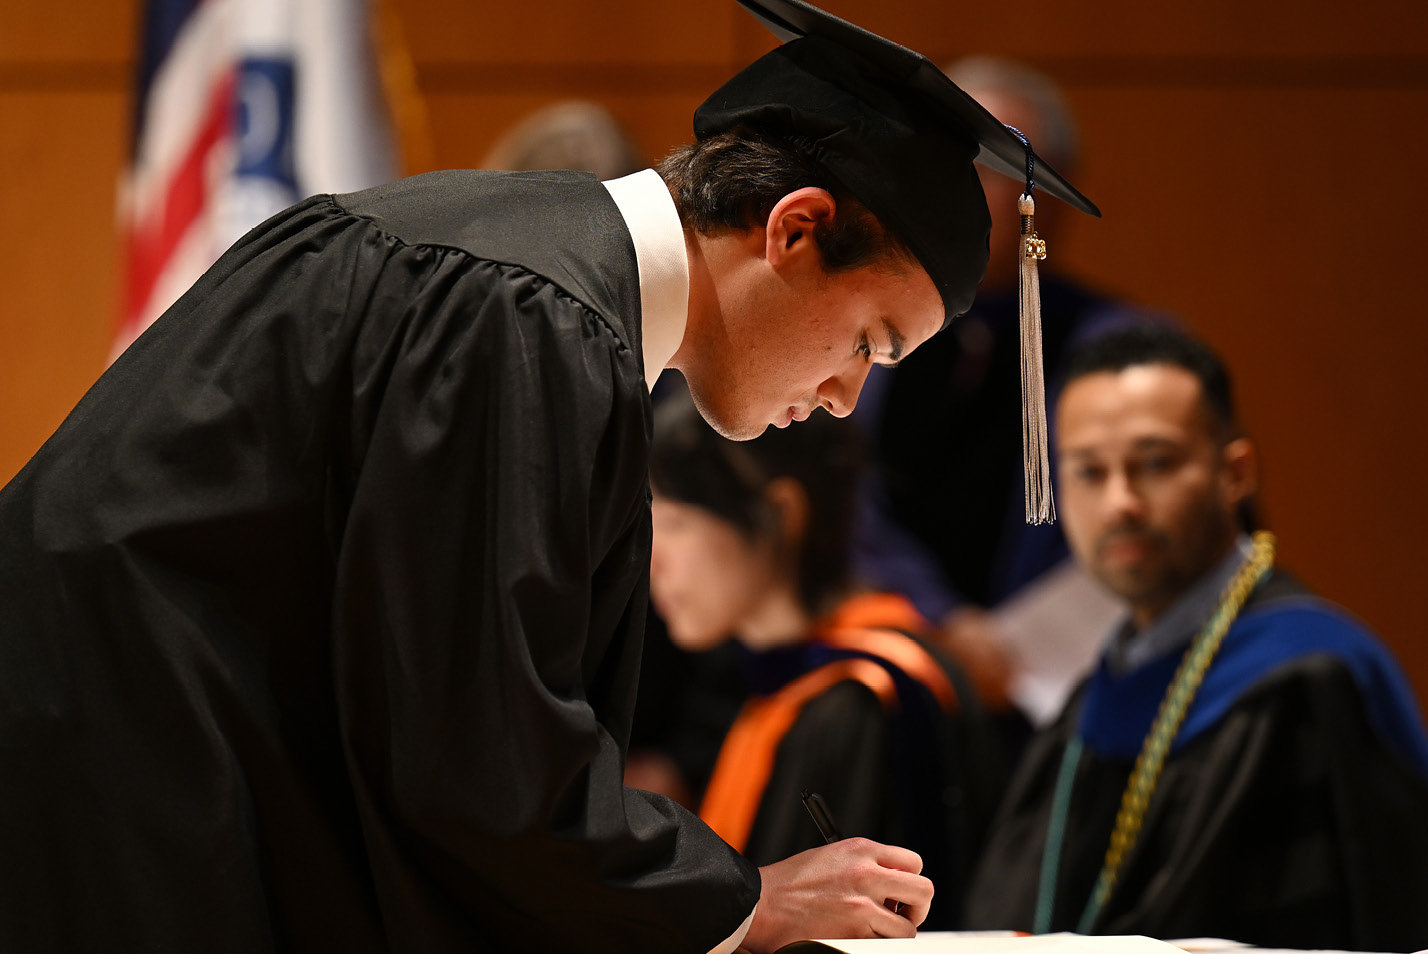 A student signs the PBK registry at a ceremony prior to Commencement